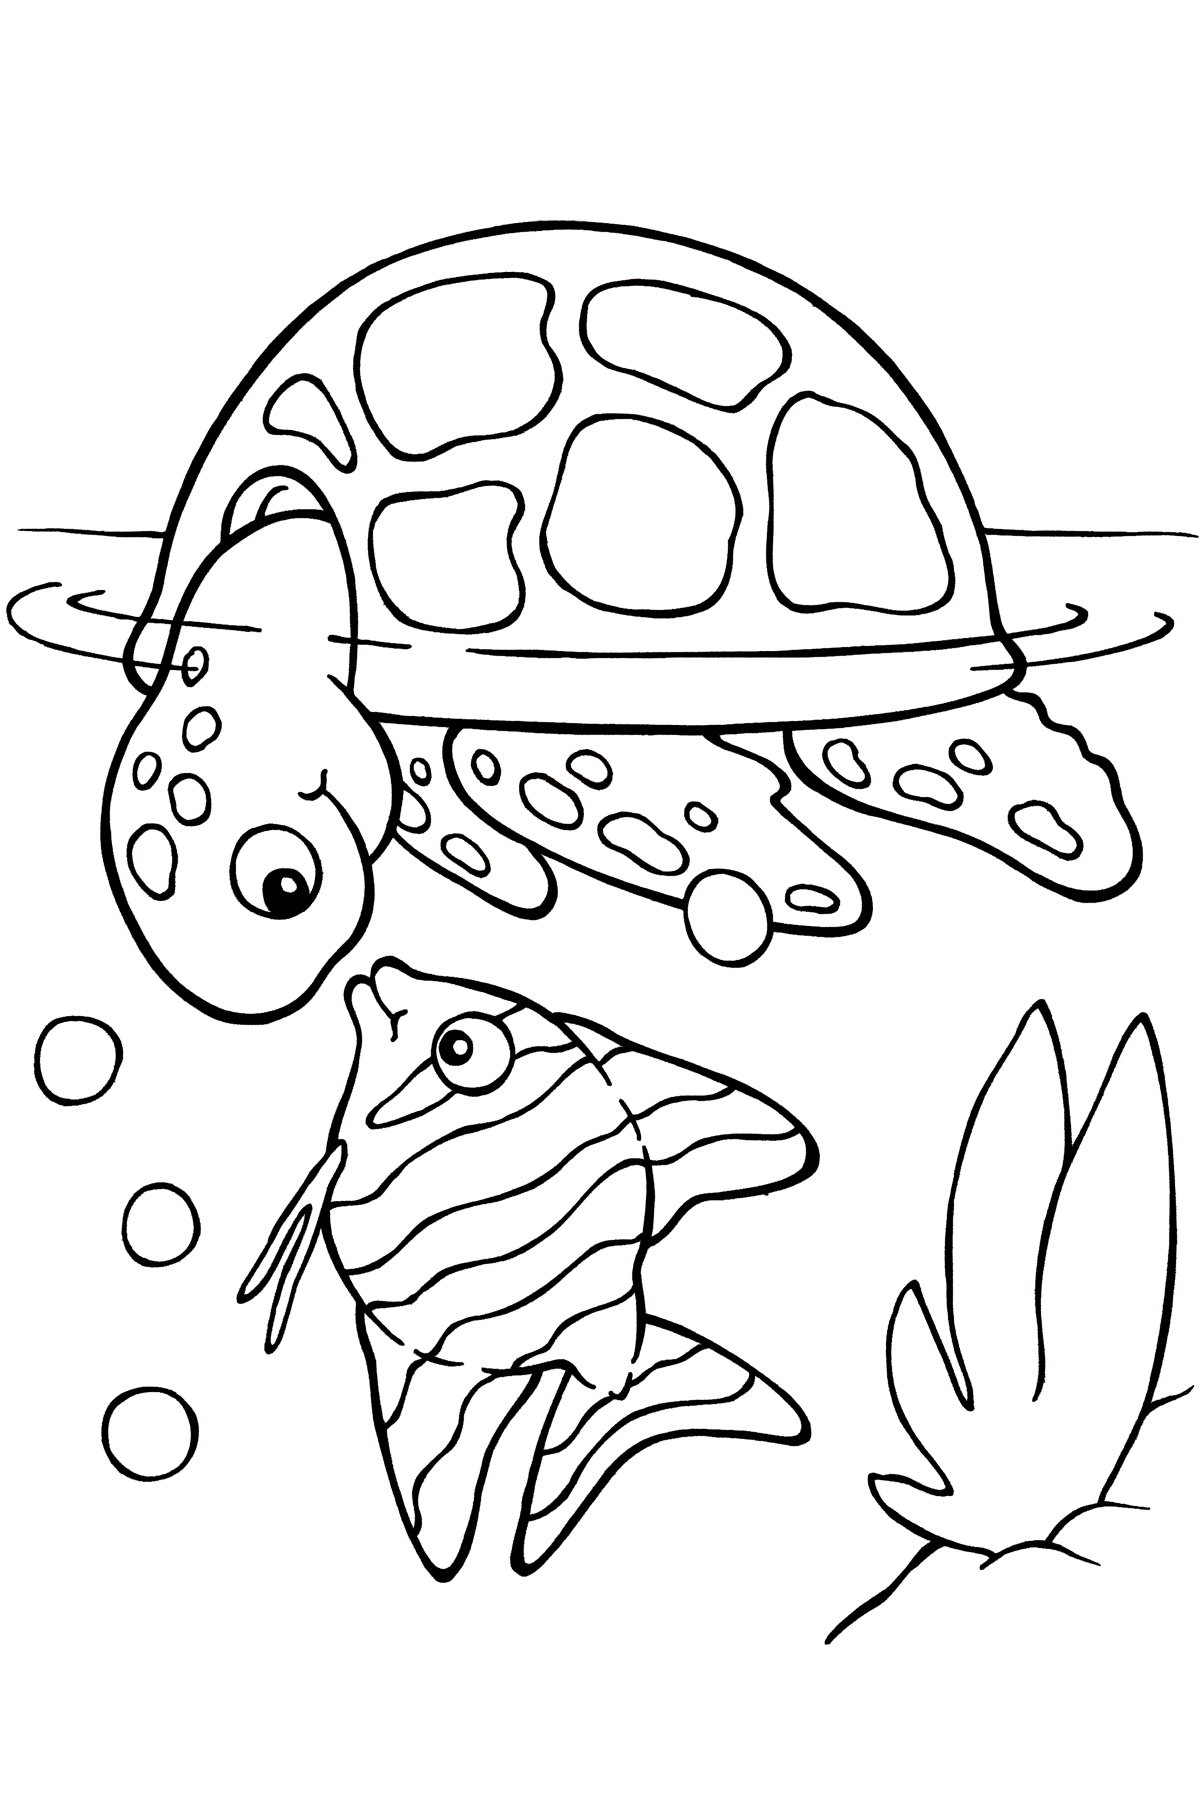 Turtle And Fish Line Art by SASGraphics on deviantART